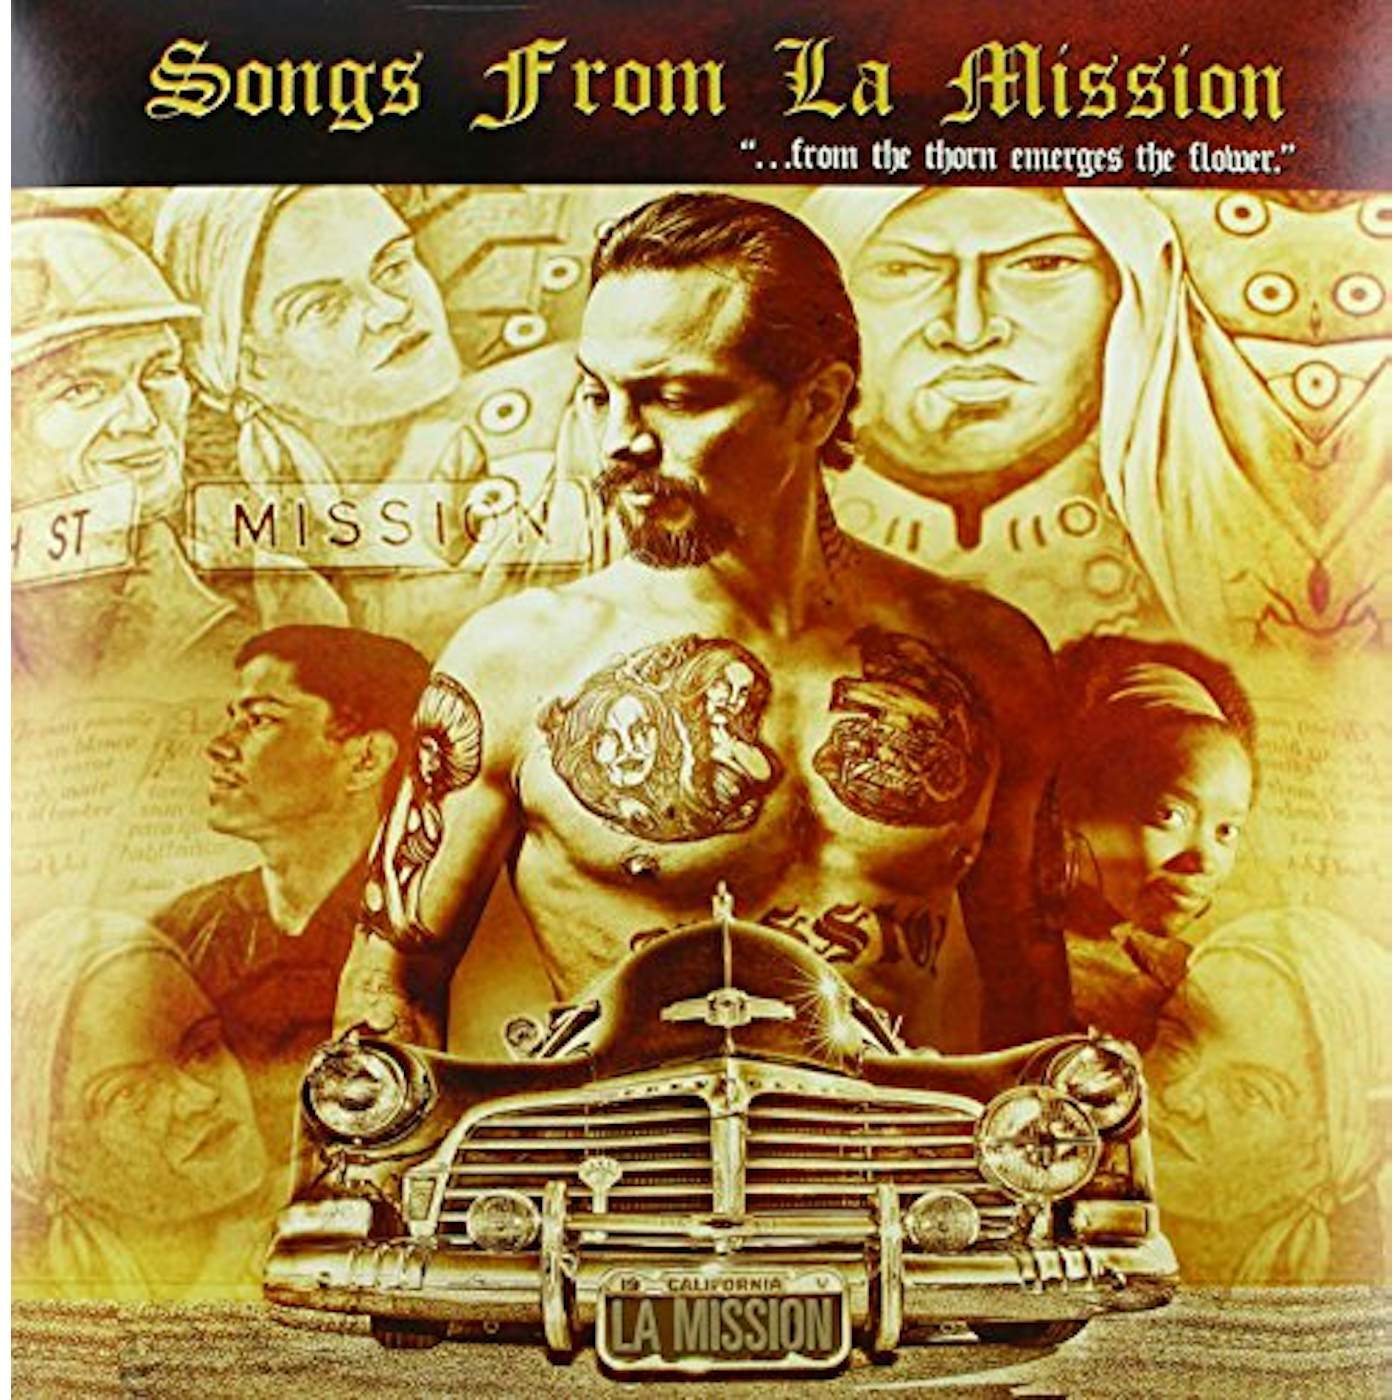 Songs from La Mission Vinyl Record